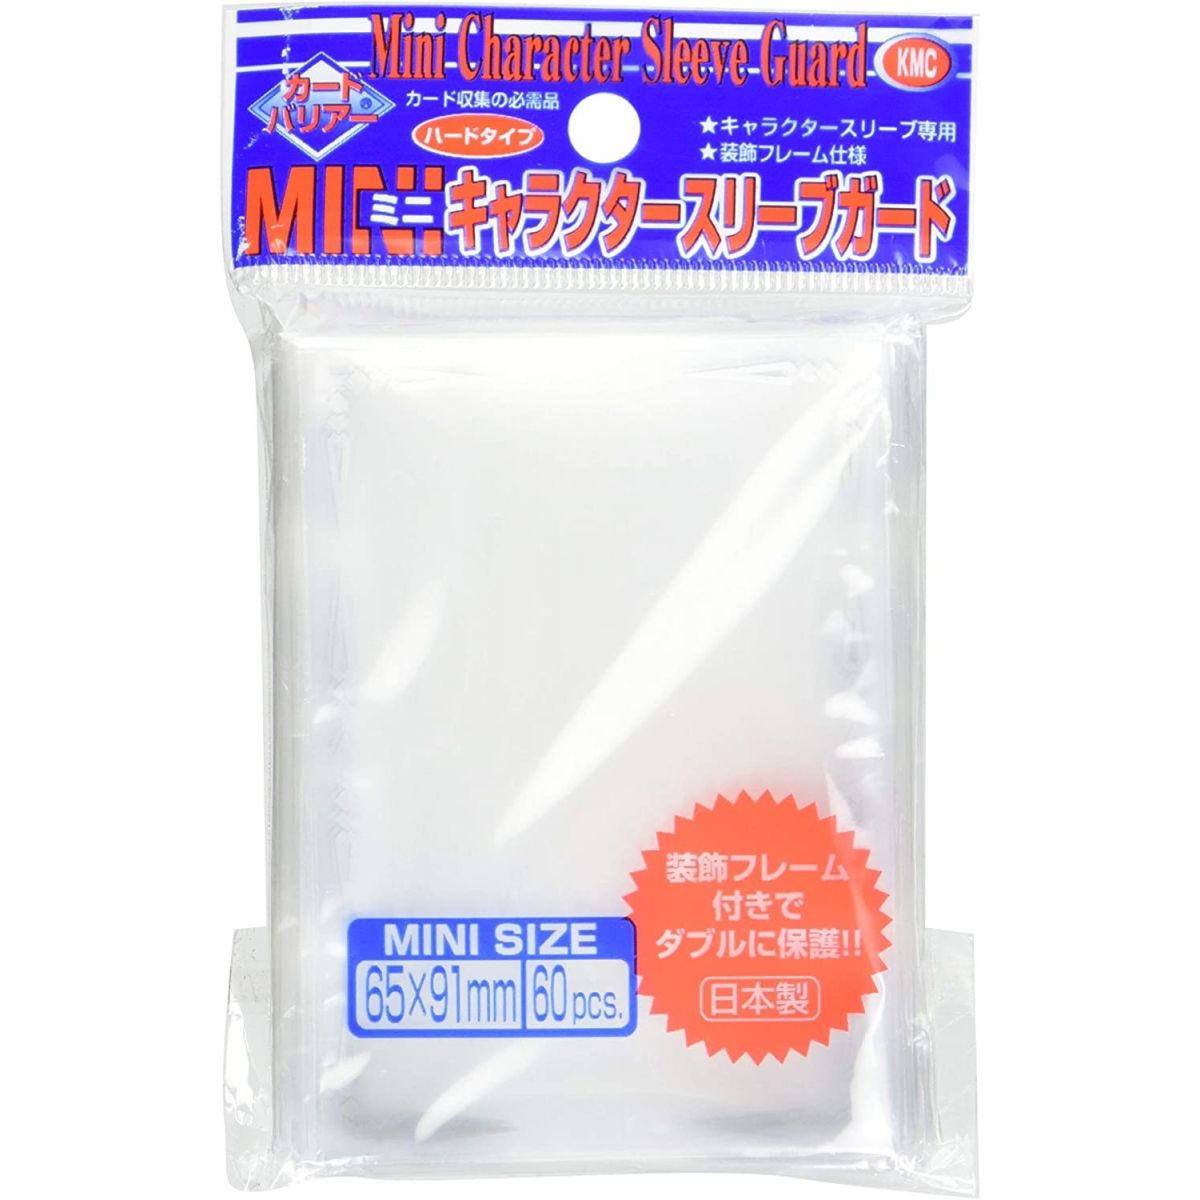 Item KMC - Over-Sleeves Outer - Small - Mini Character Sleeve Guard